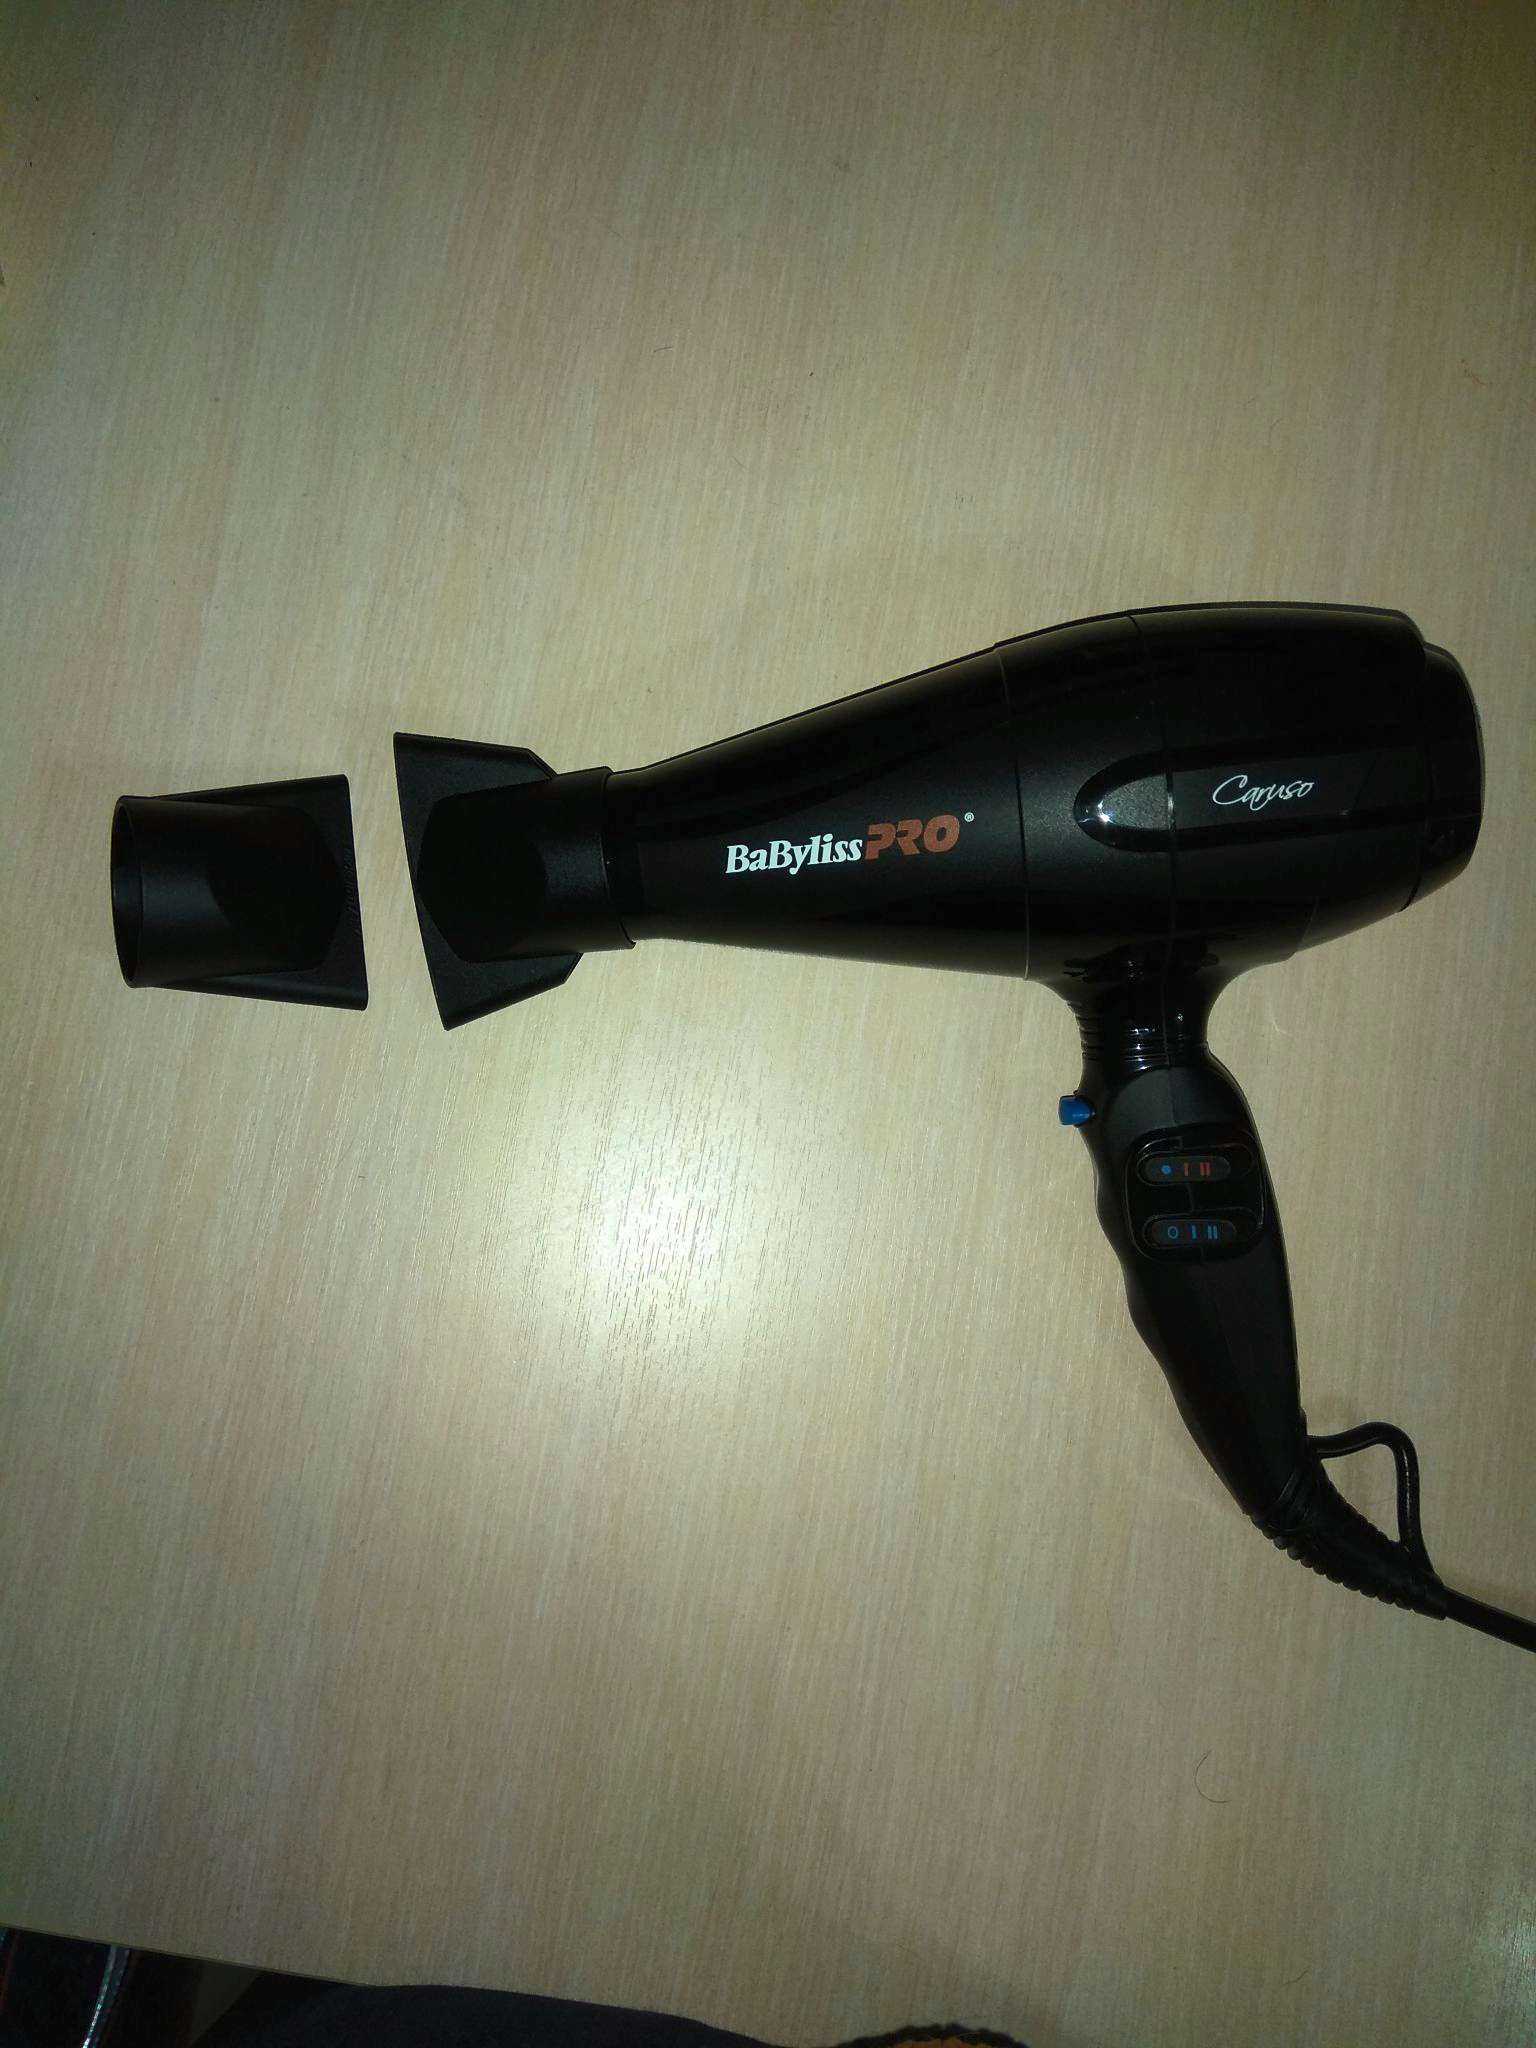 Babyliss bab6520re